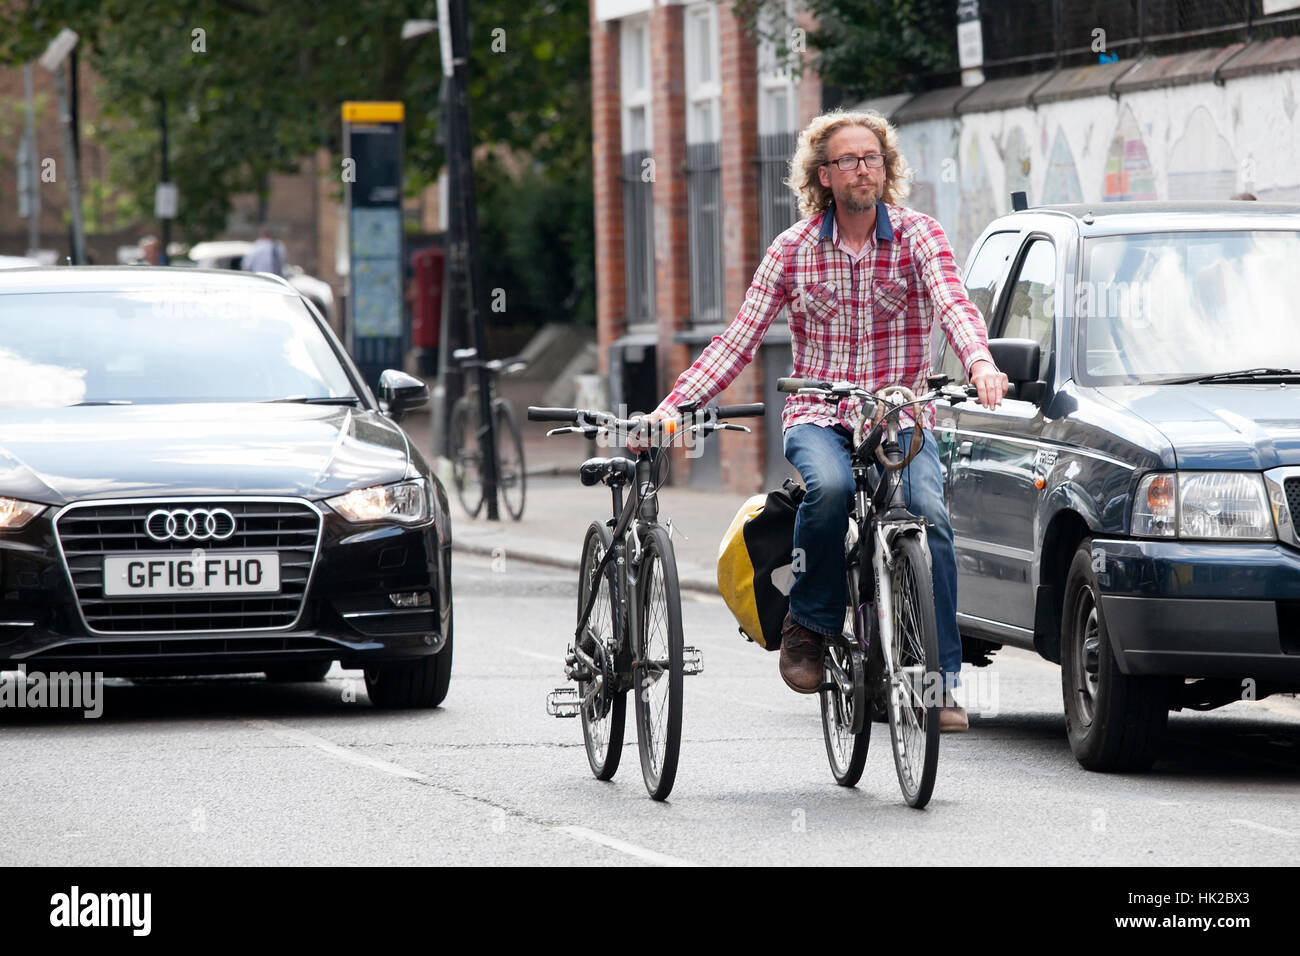 LONDON, ENGLAND - JULY 12, 2016 Serious blond curly bearded man in a plaid shirt riding a bike and holding a second bike for the wheel in Shoreditch. Stock Photo